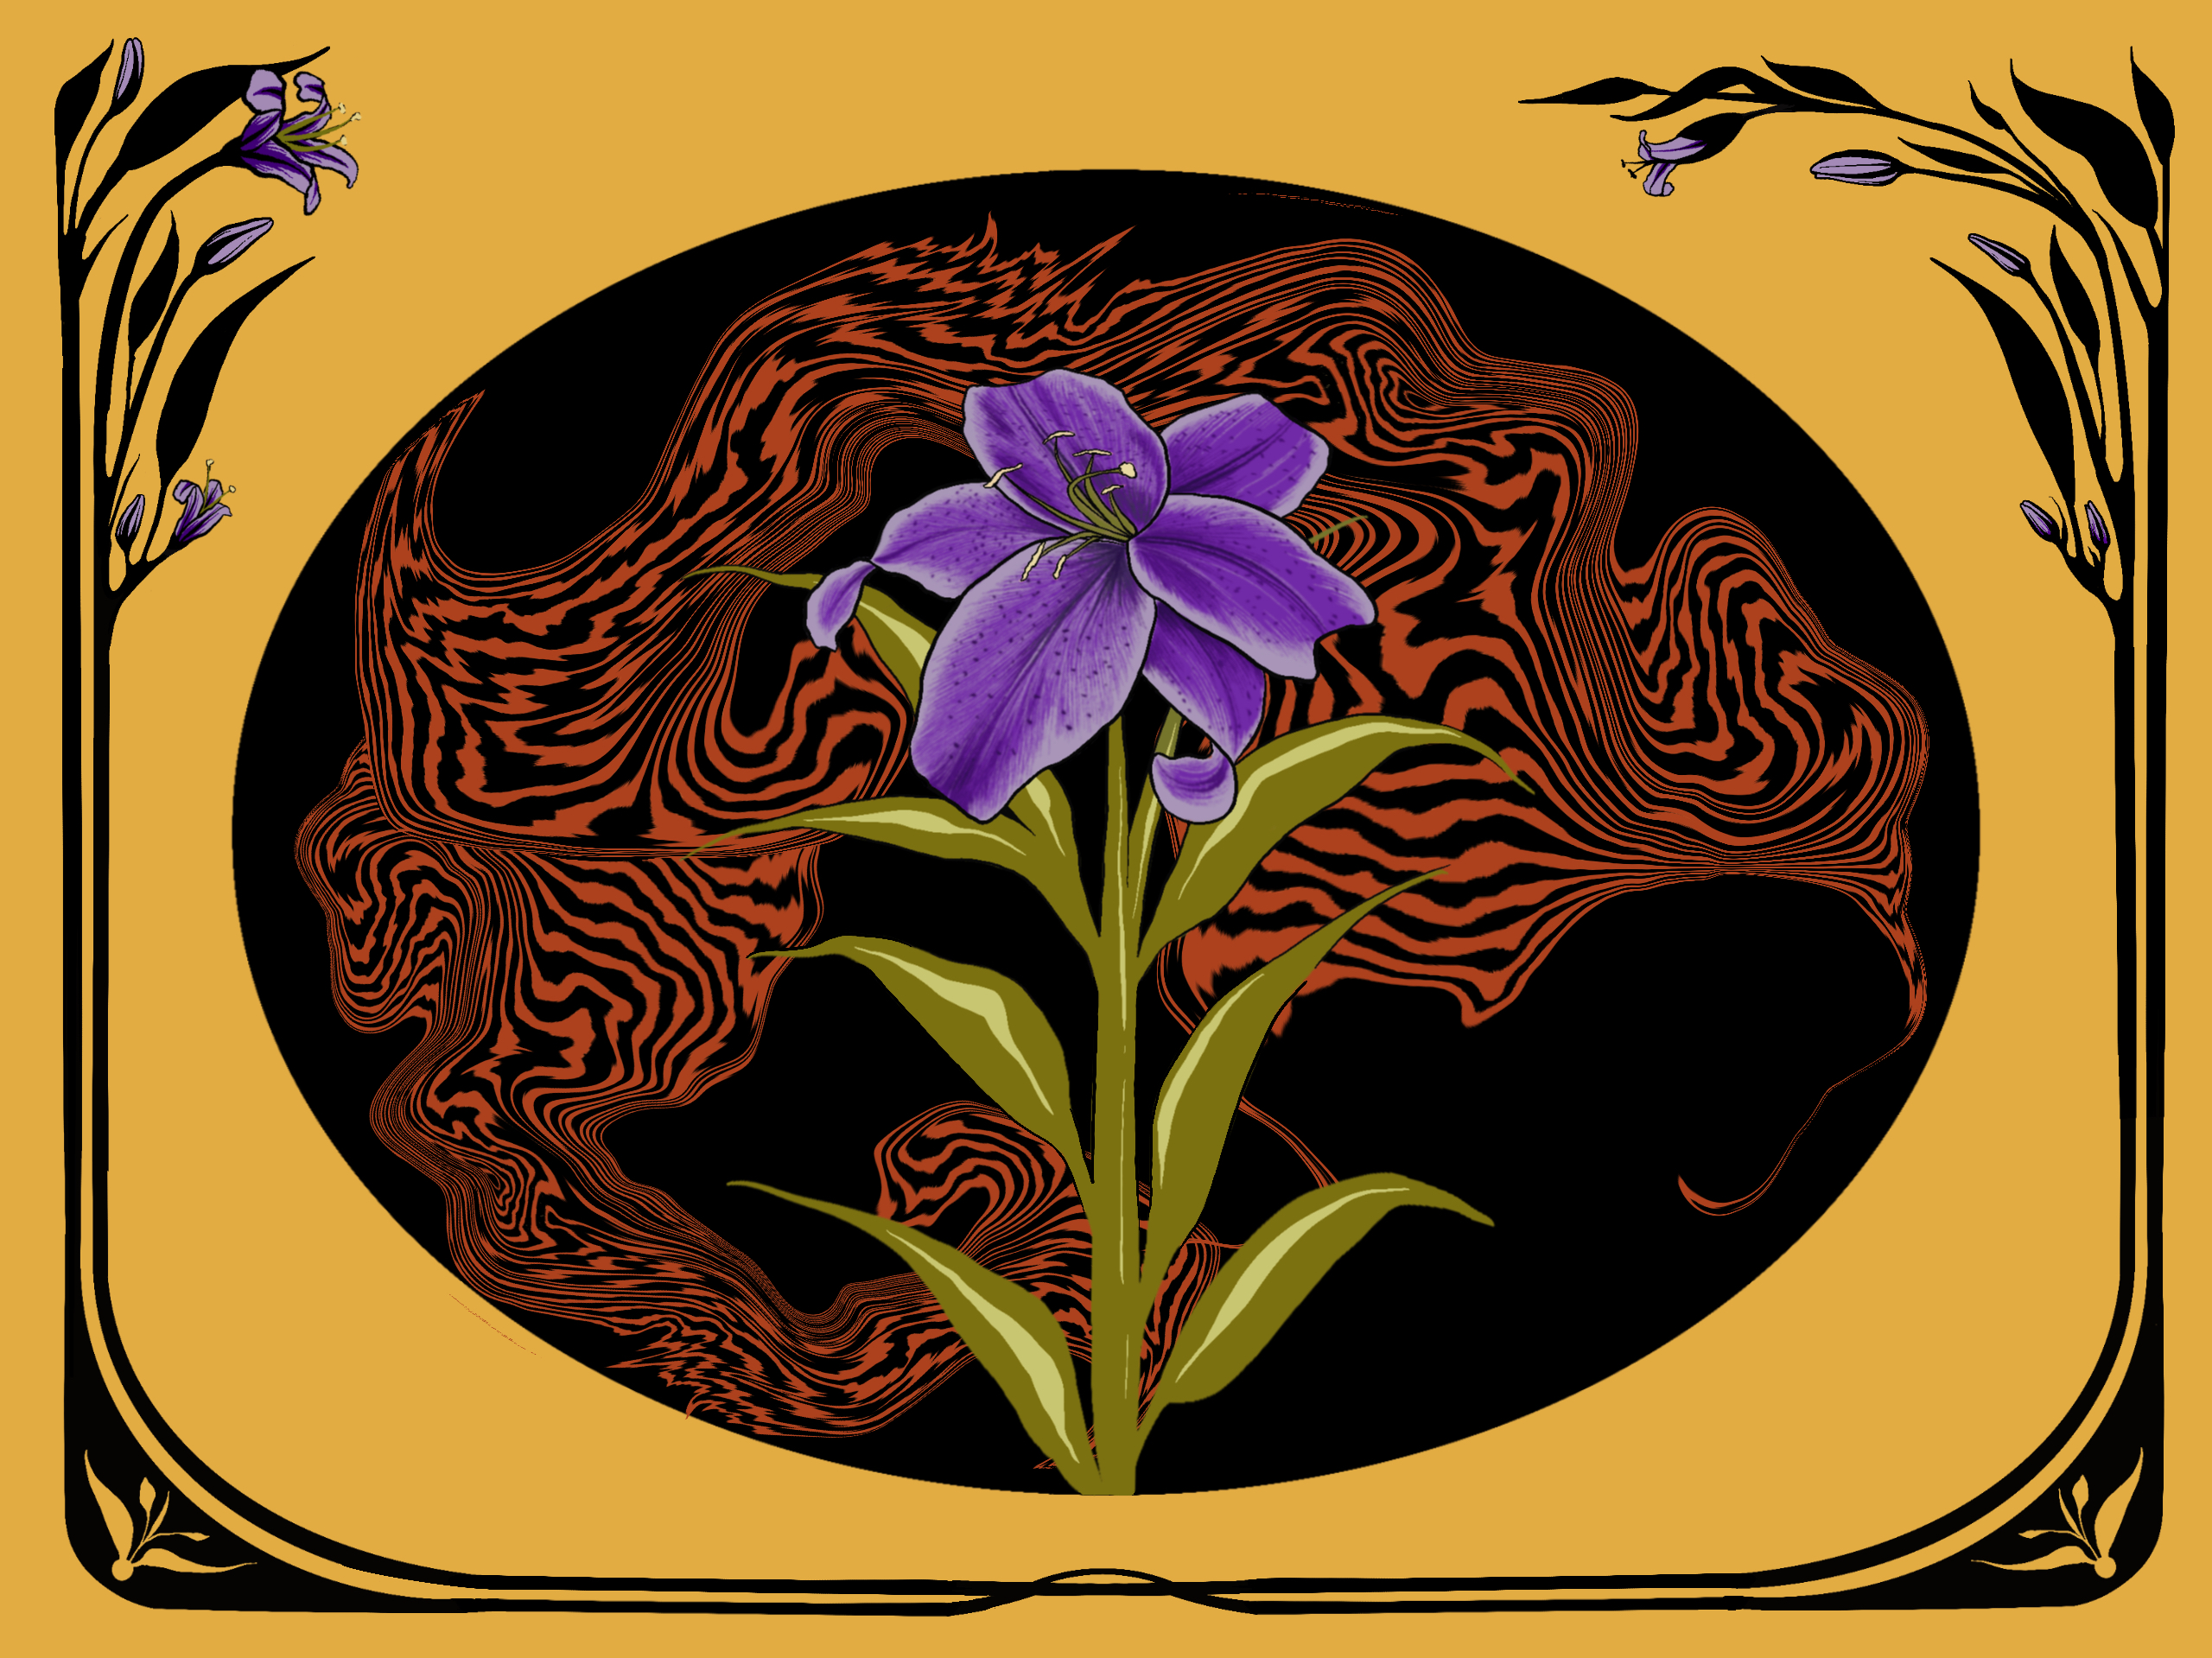 Image: In the center of a golden background, is a black oval containing orange and black ripples, overlaid with a vegetal stalk, blooming a purple flower. On the outside of the image is a tree-like black silhouette, running on the left, bottom, and right edges of the image. Image by Summer Milles.